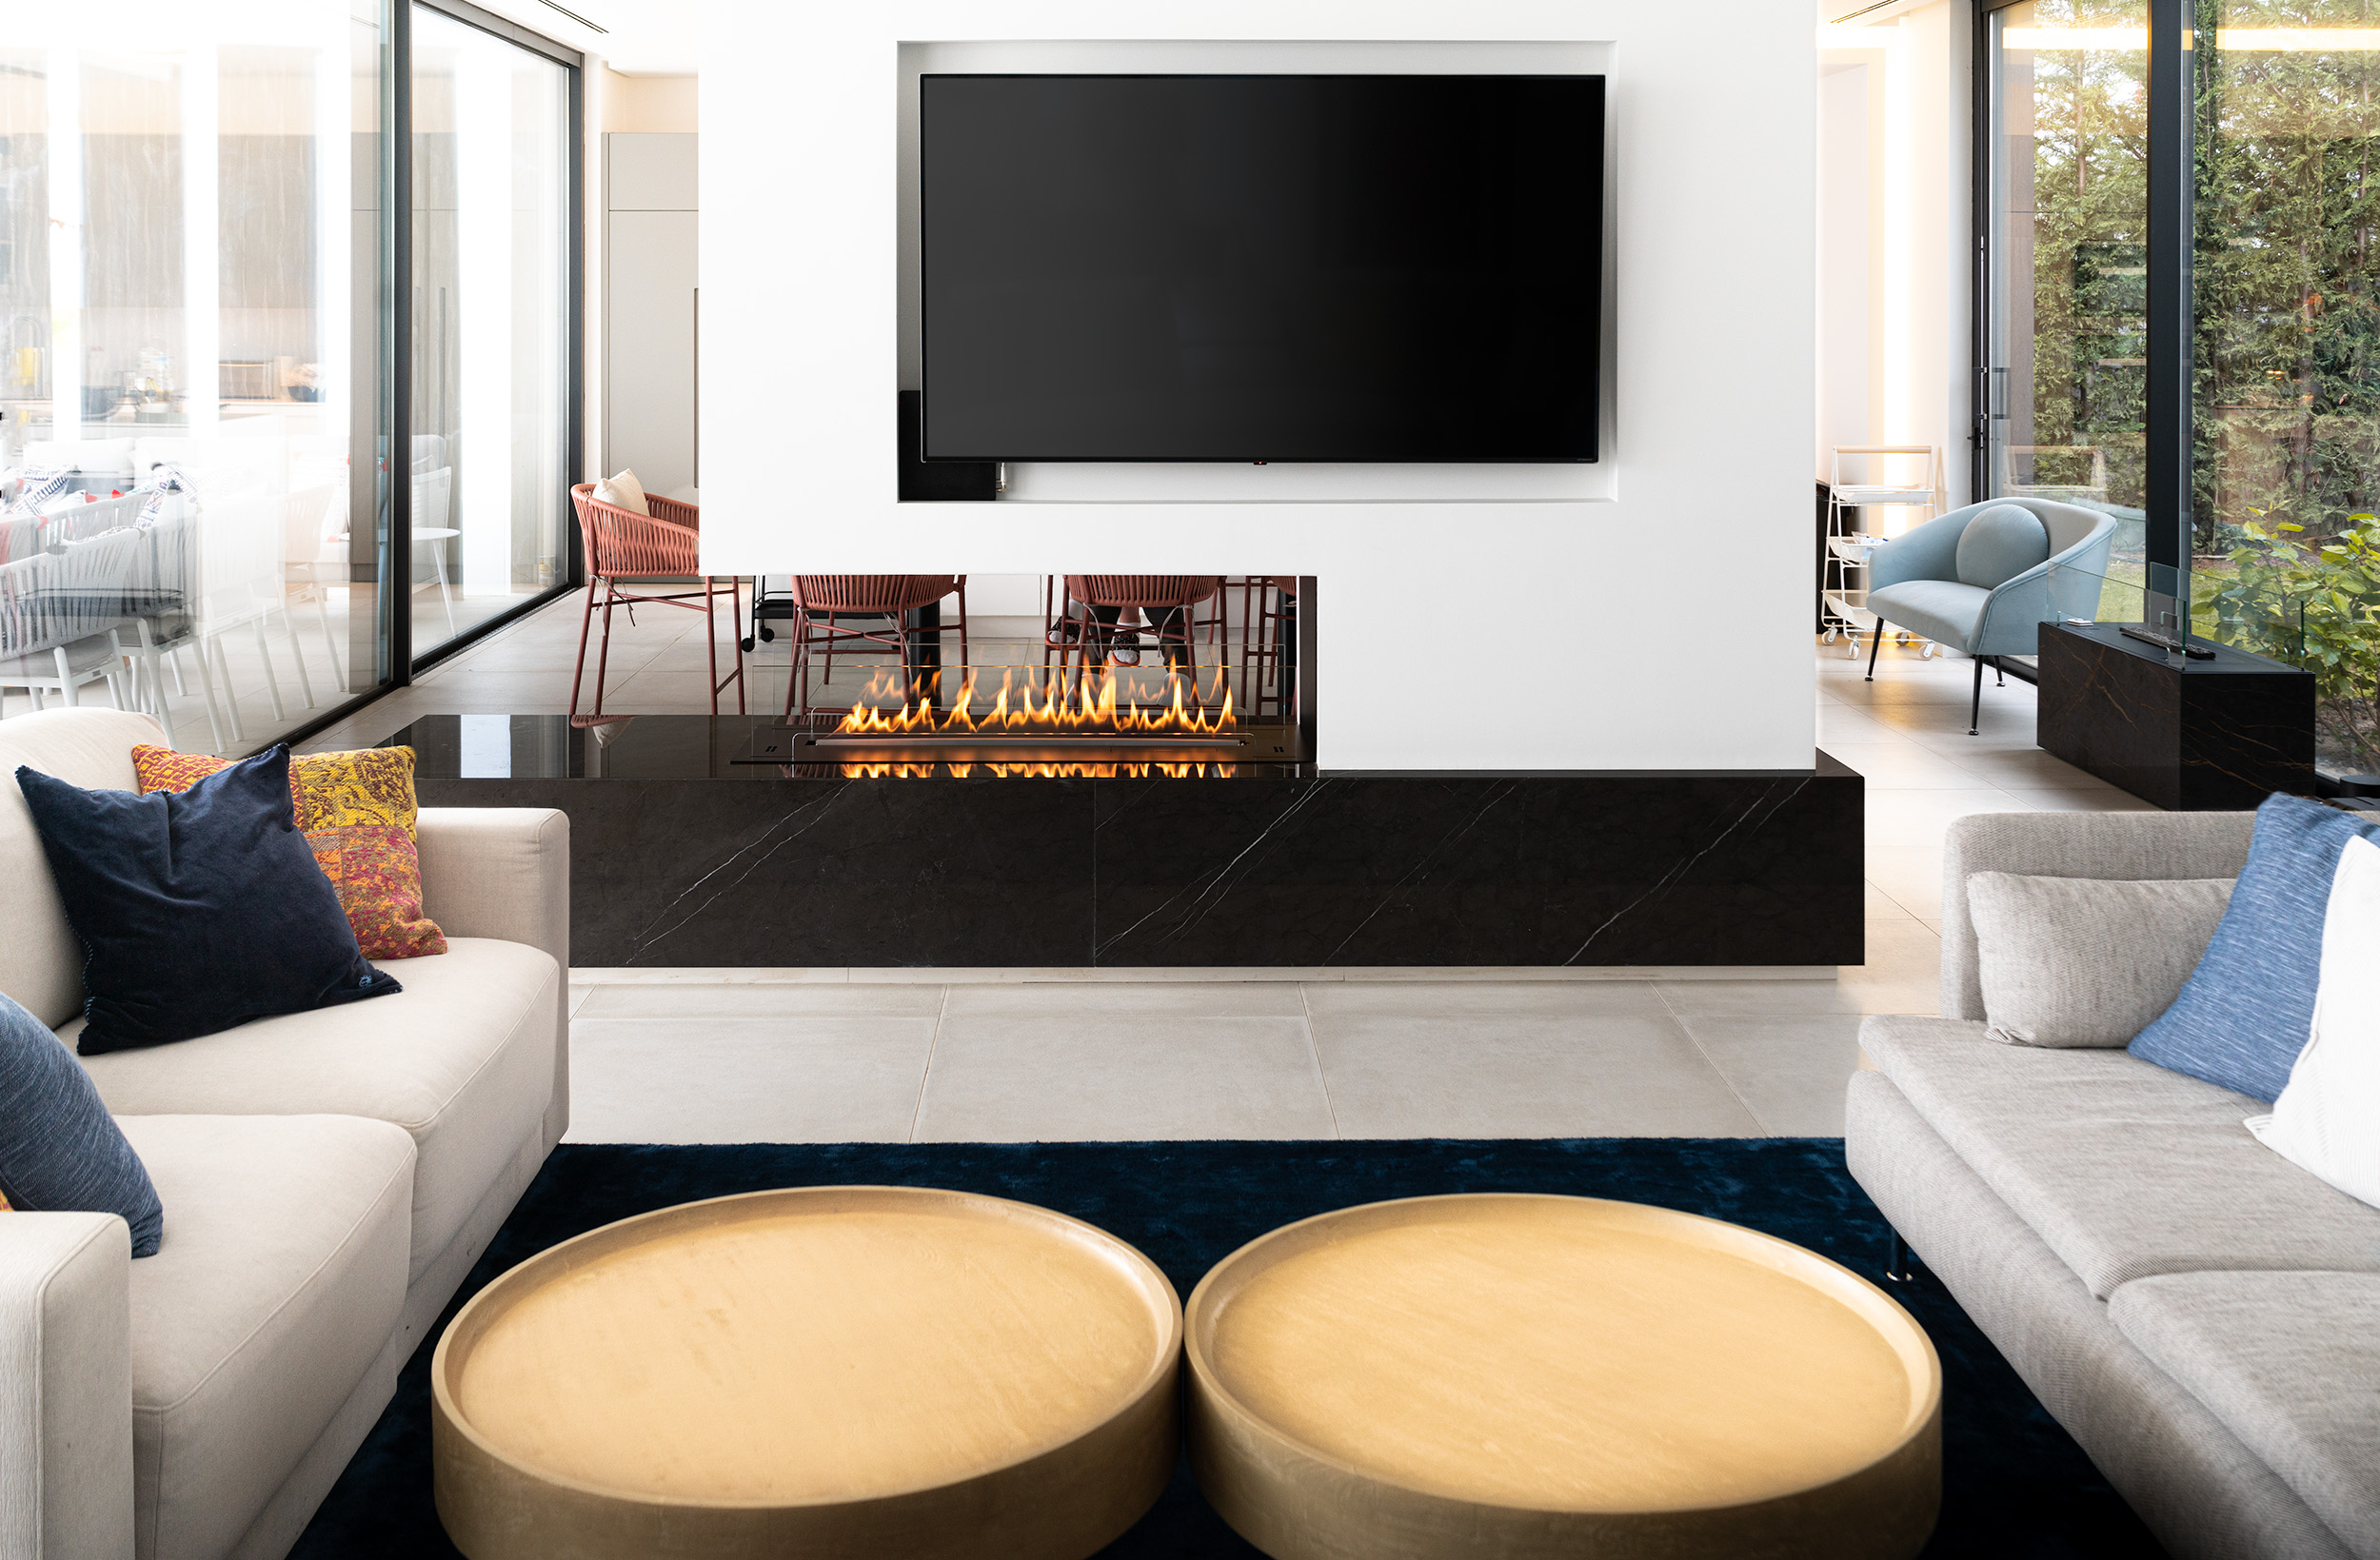 Ethanol fireplace in the living room. 